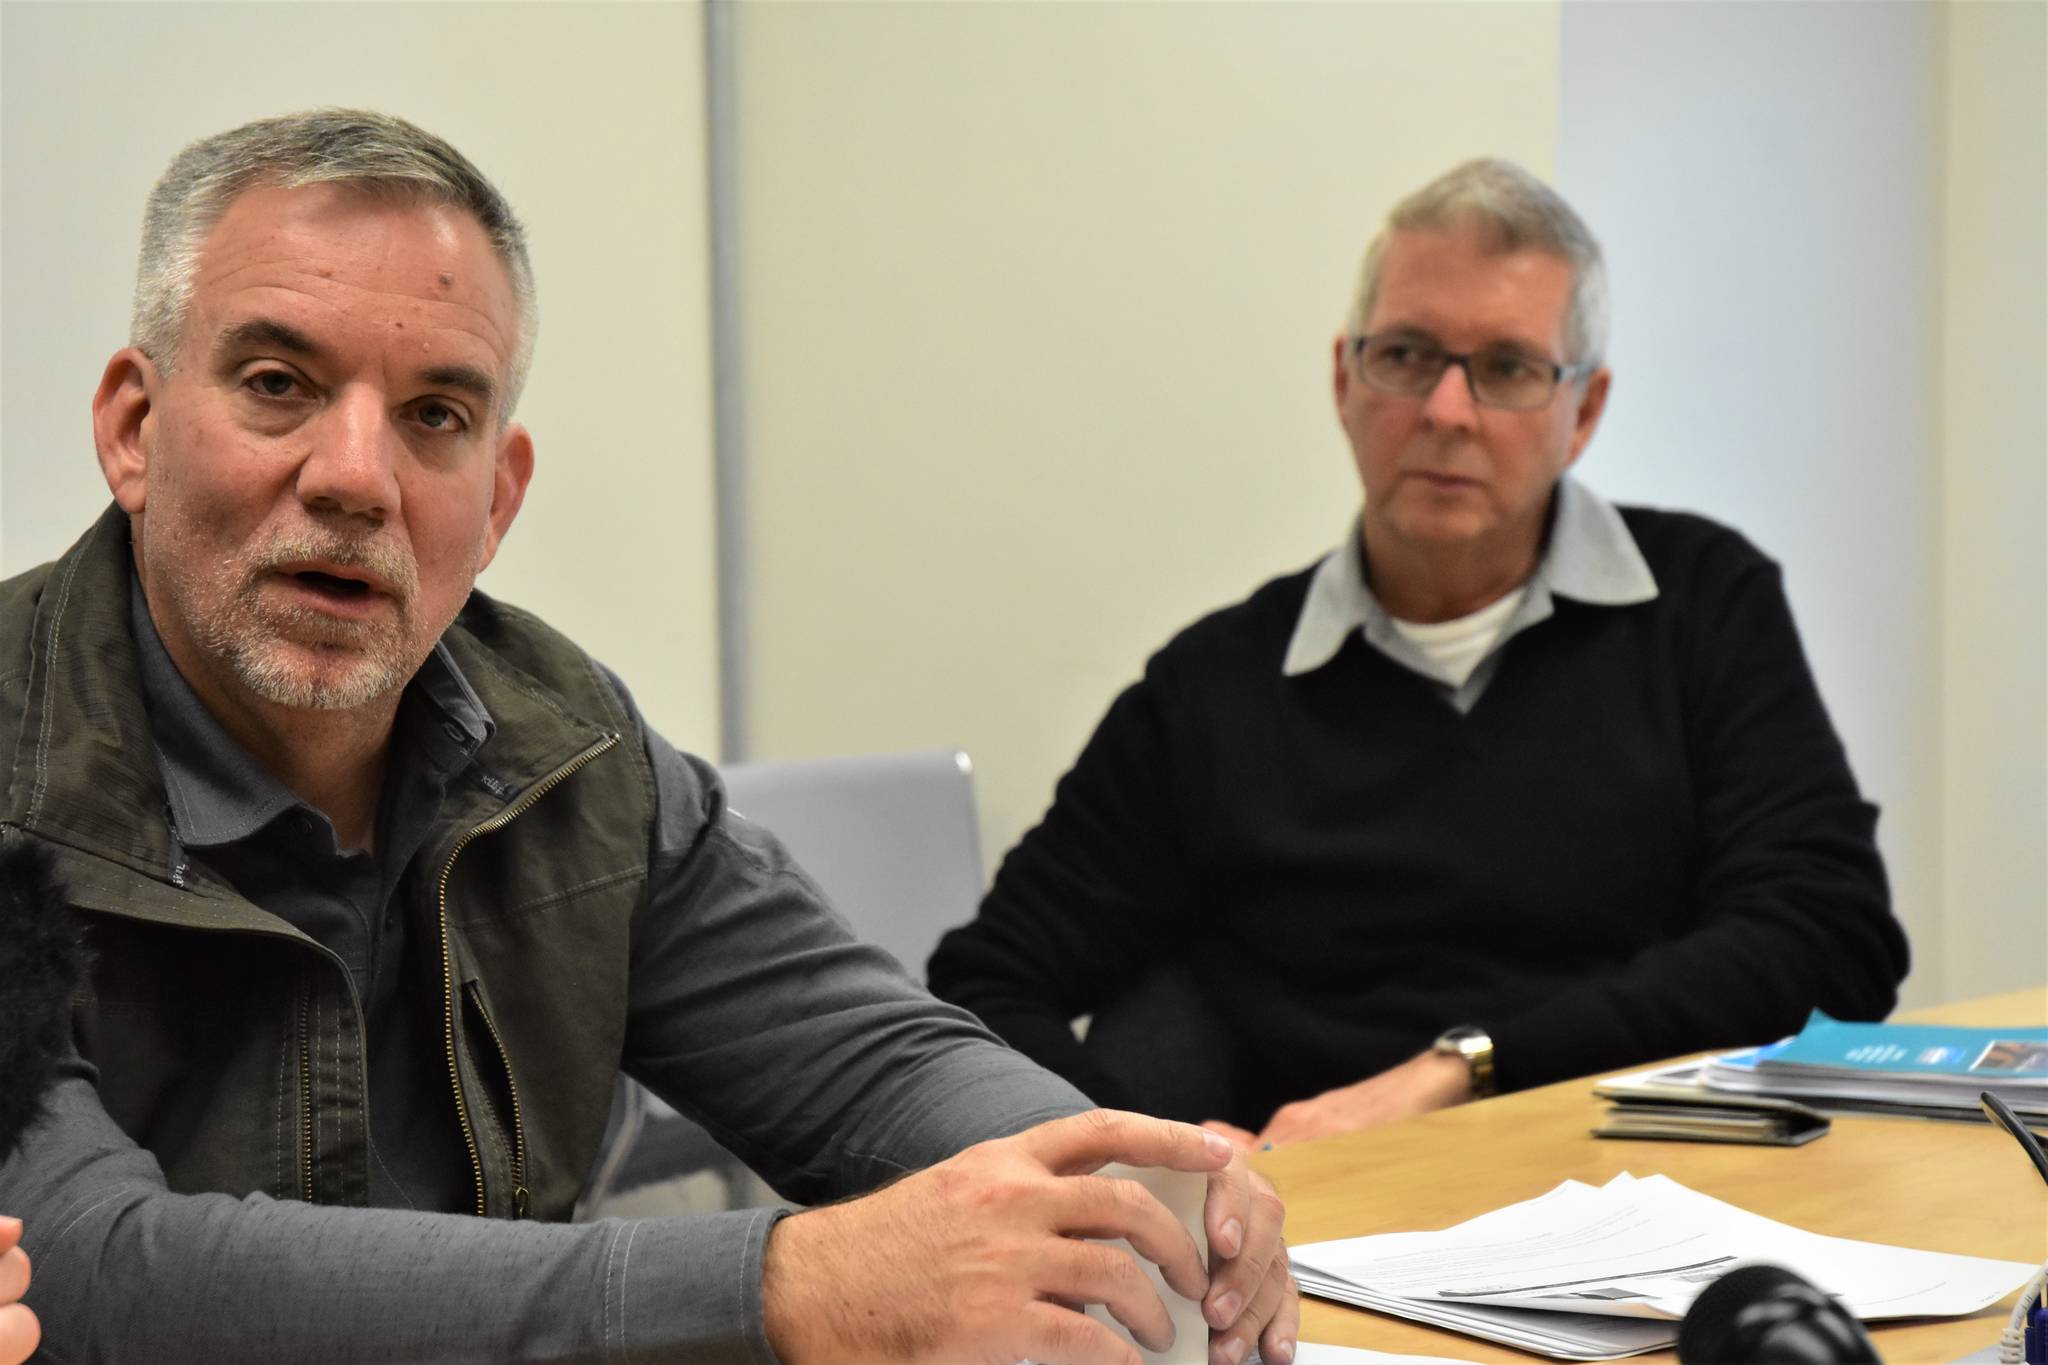 Howard Sherman, left, executive vice president of onboard revenue and destination services for Norwegian Cruise Lines and Steve Moeller, right, senior vice president of commercial development at Norwegian, meet with reporters at Juneau City Hall on Oct. 2, 2019. (Peter Segall | Juneau Empire)